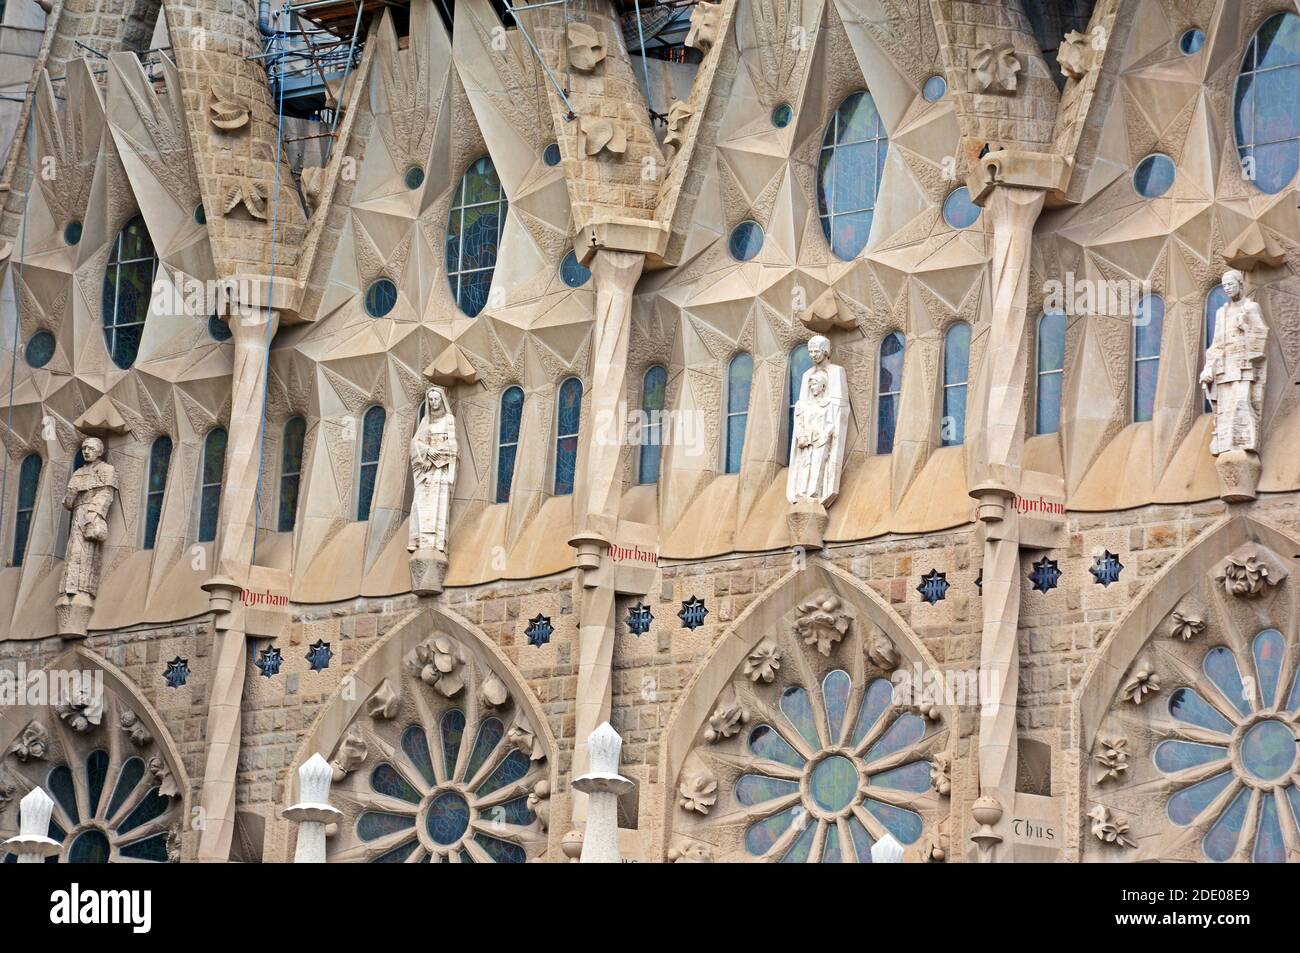 details of the east facade of the Sagrada Familia cathedral, Barcelona, Spain Stock Photo